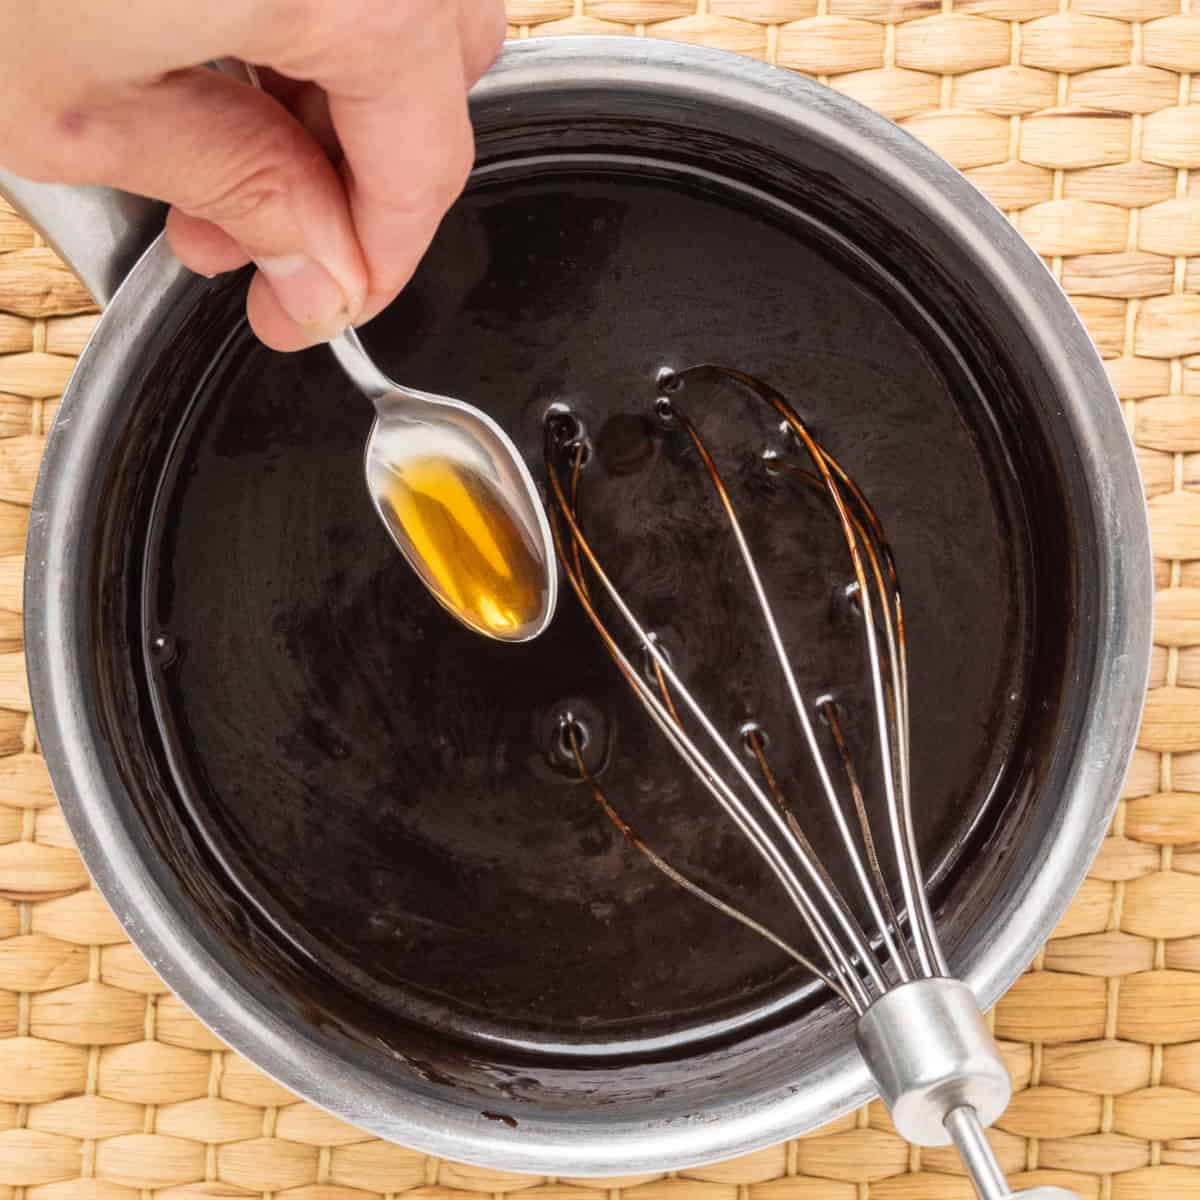 A small spoonful of vanilla extract is whisked into the sauce.